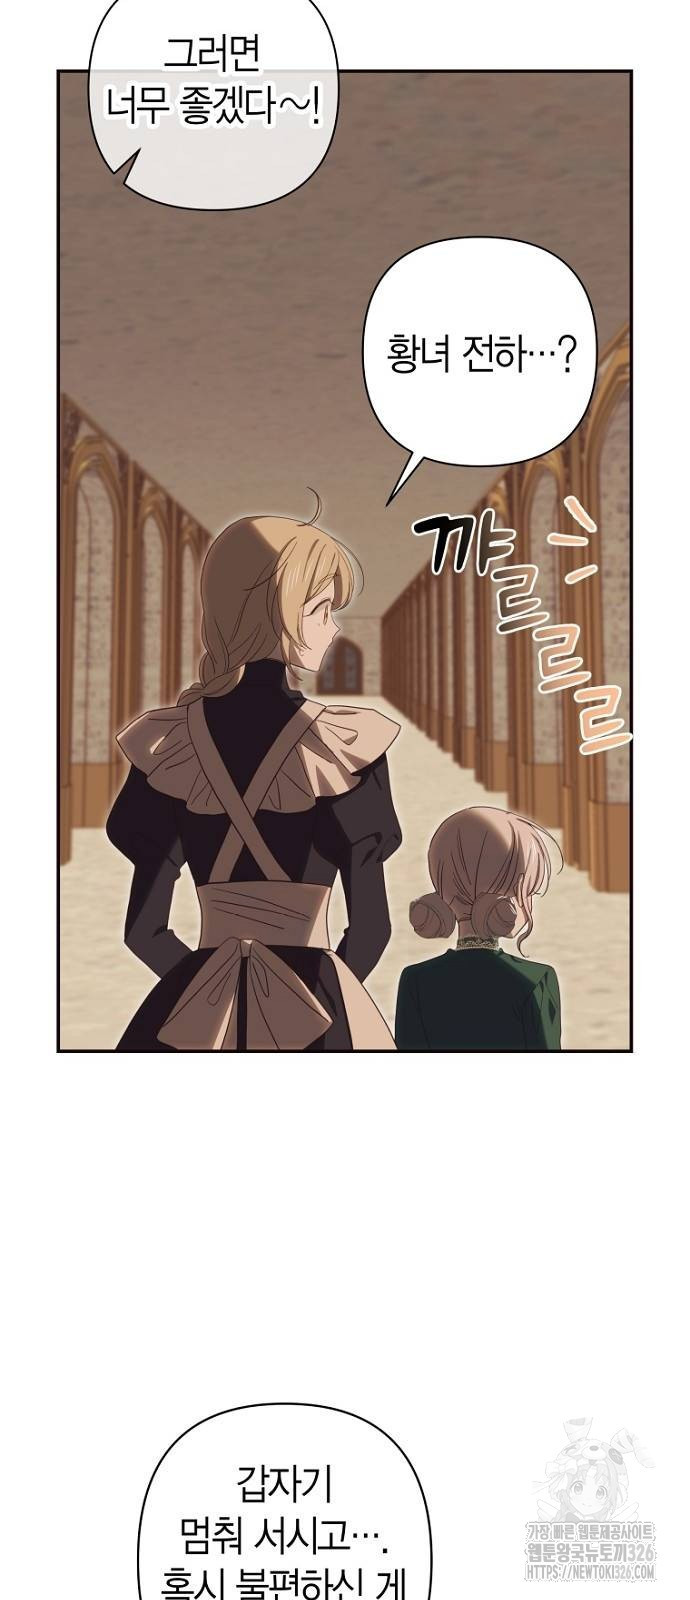 Snow Mountain Monster Princess - Chapter 9 - Page 54